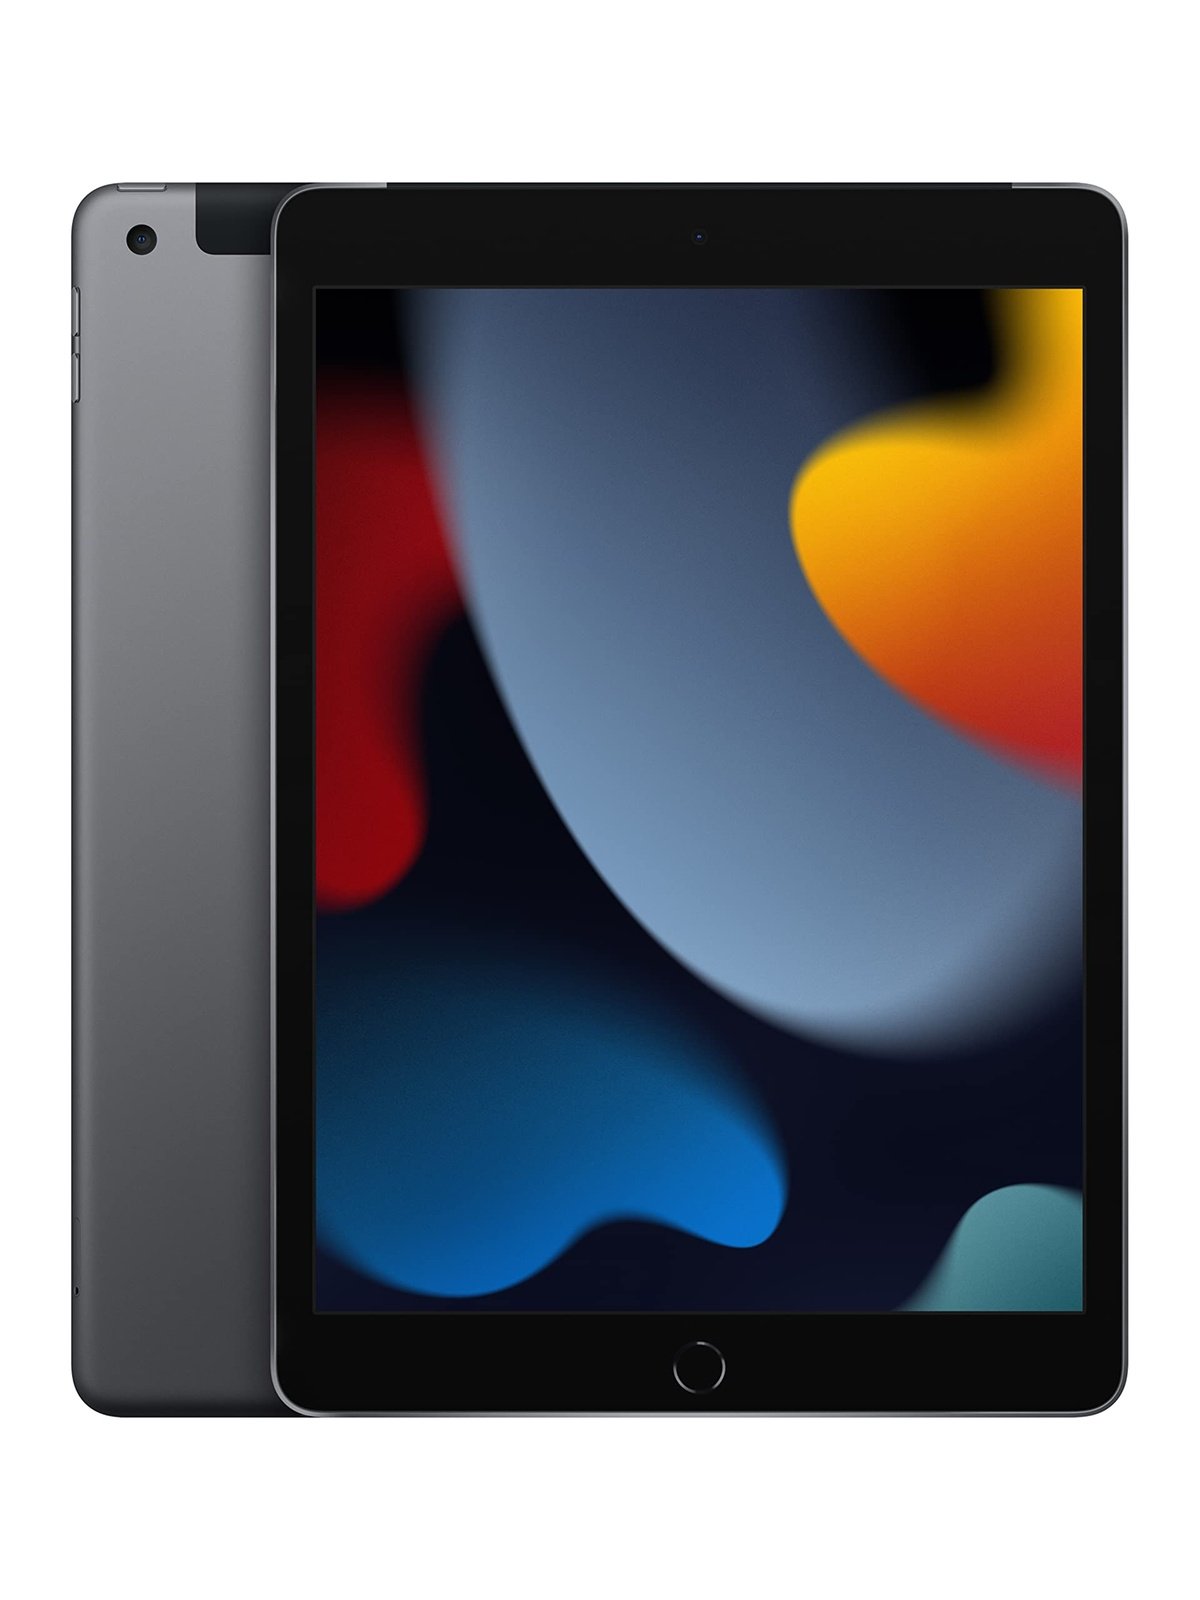 Apple iPad (9th Generation): with A13 Bionic chip, 10.2-inch Retina Display, 64GB, Wi-Fi, 12MP front/8MP Back Camera, Touch ID, All-Day Battery Life – Silver